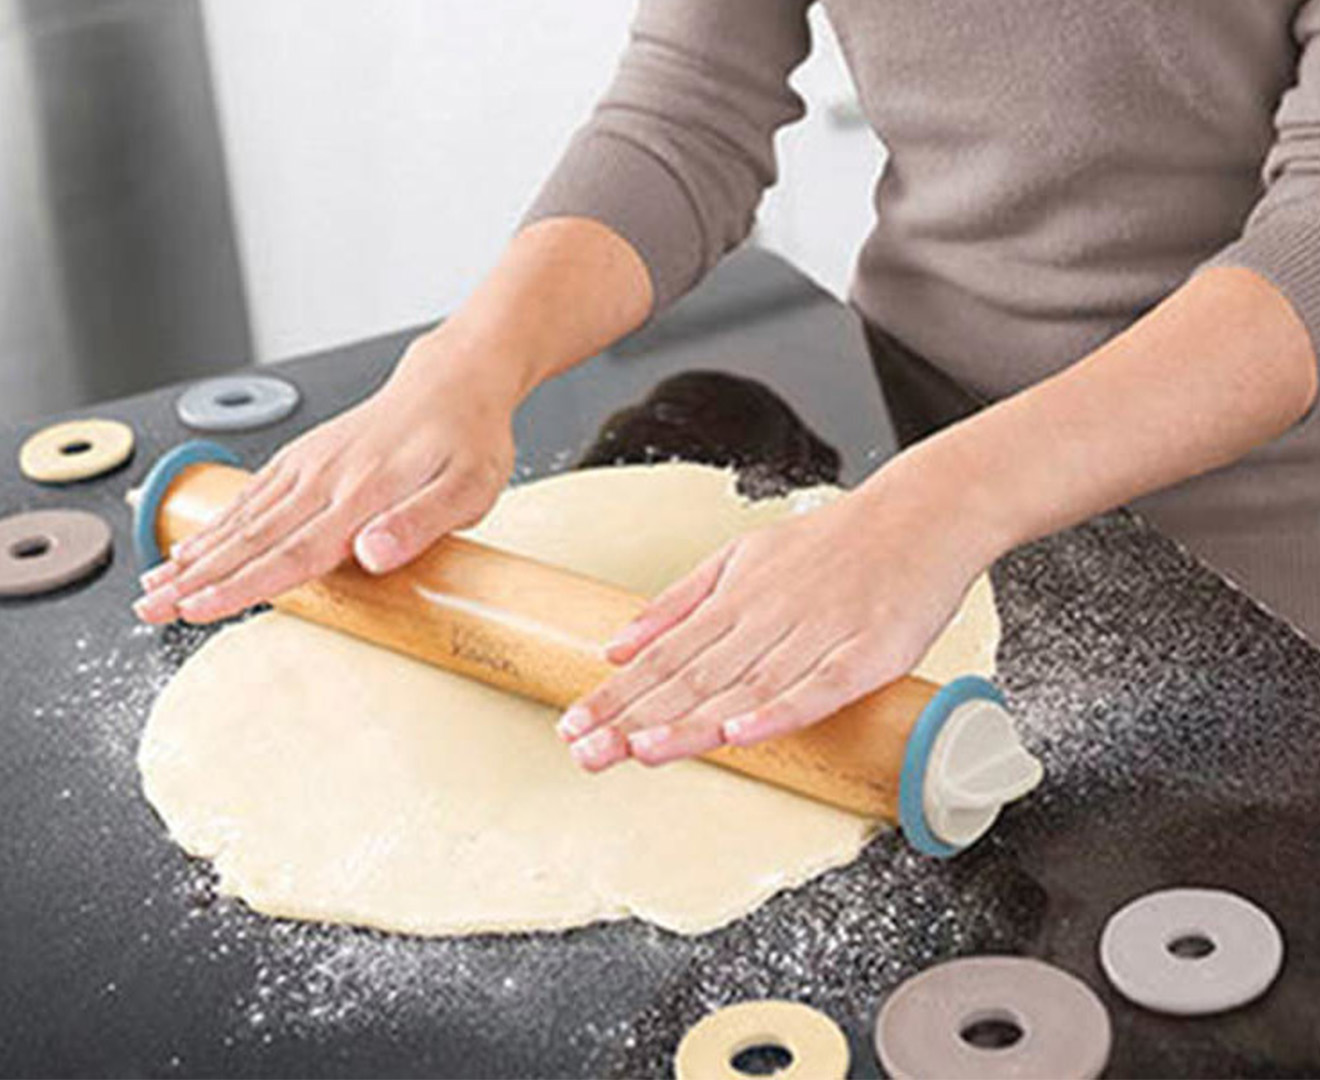 NEW and IMPROVED PrecisionPin Adjustable Rolling Pin by Joseph